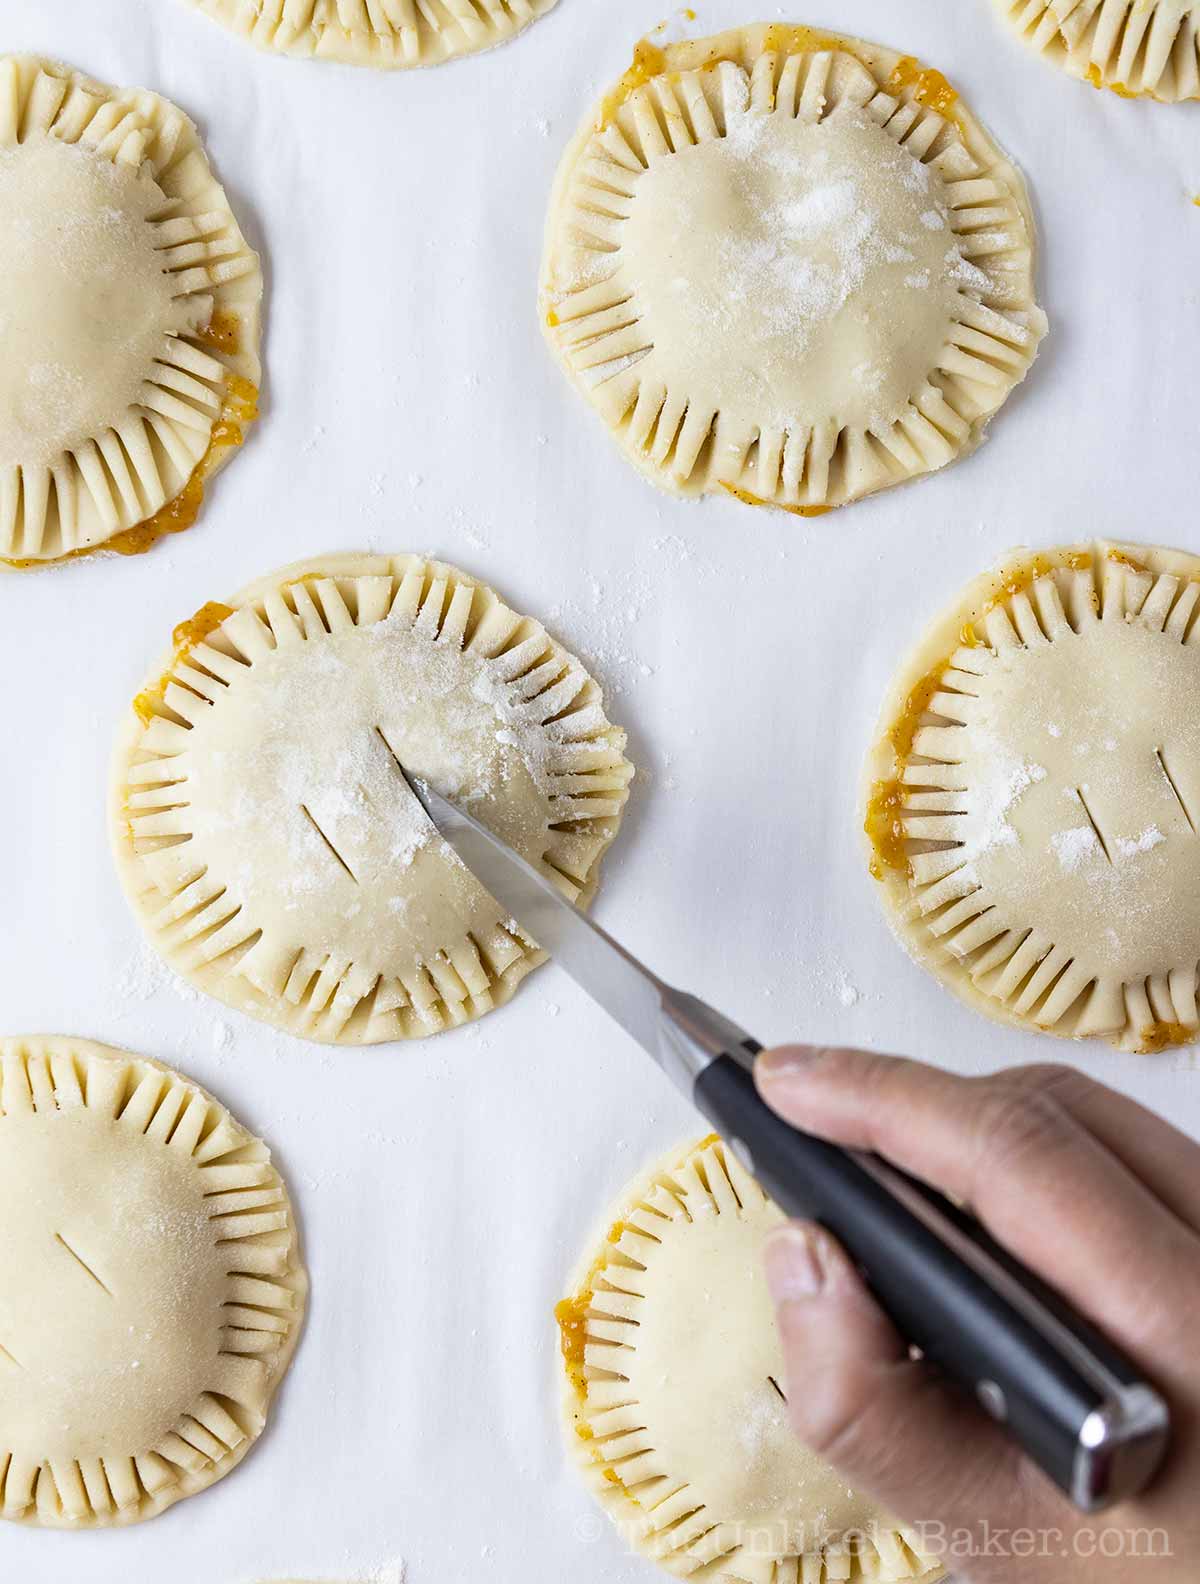 Cut the top of the pies to release air while baking.